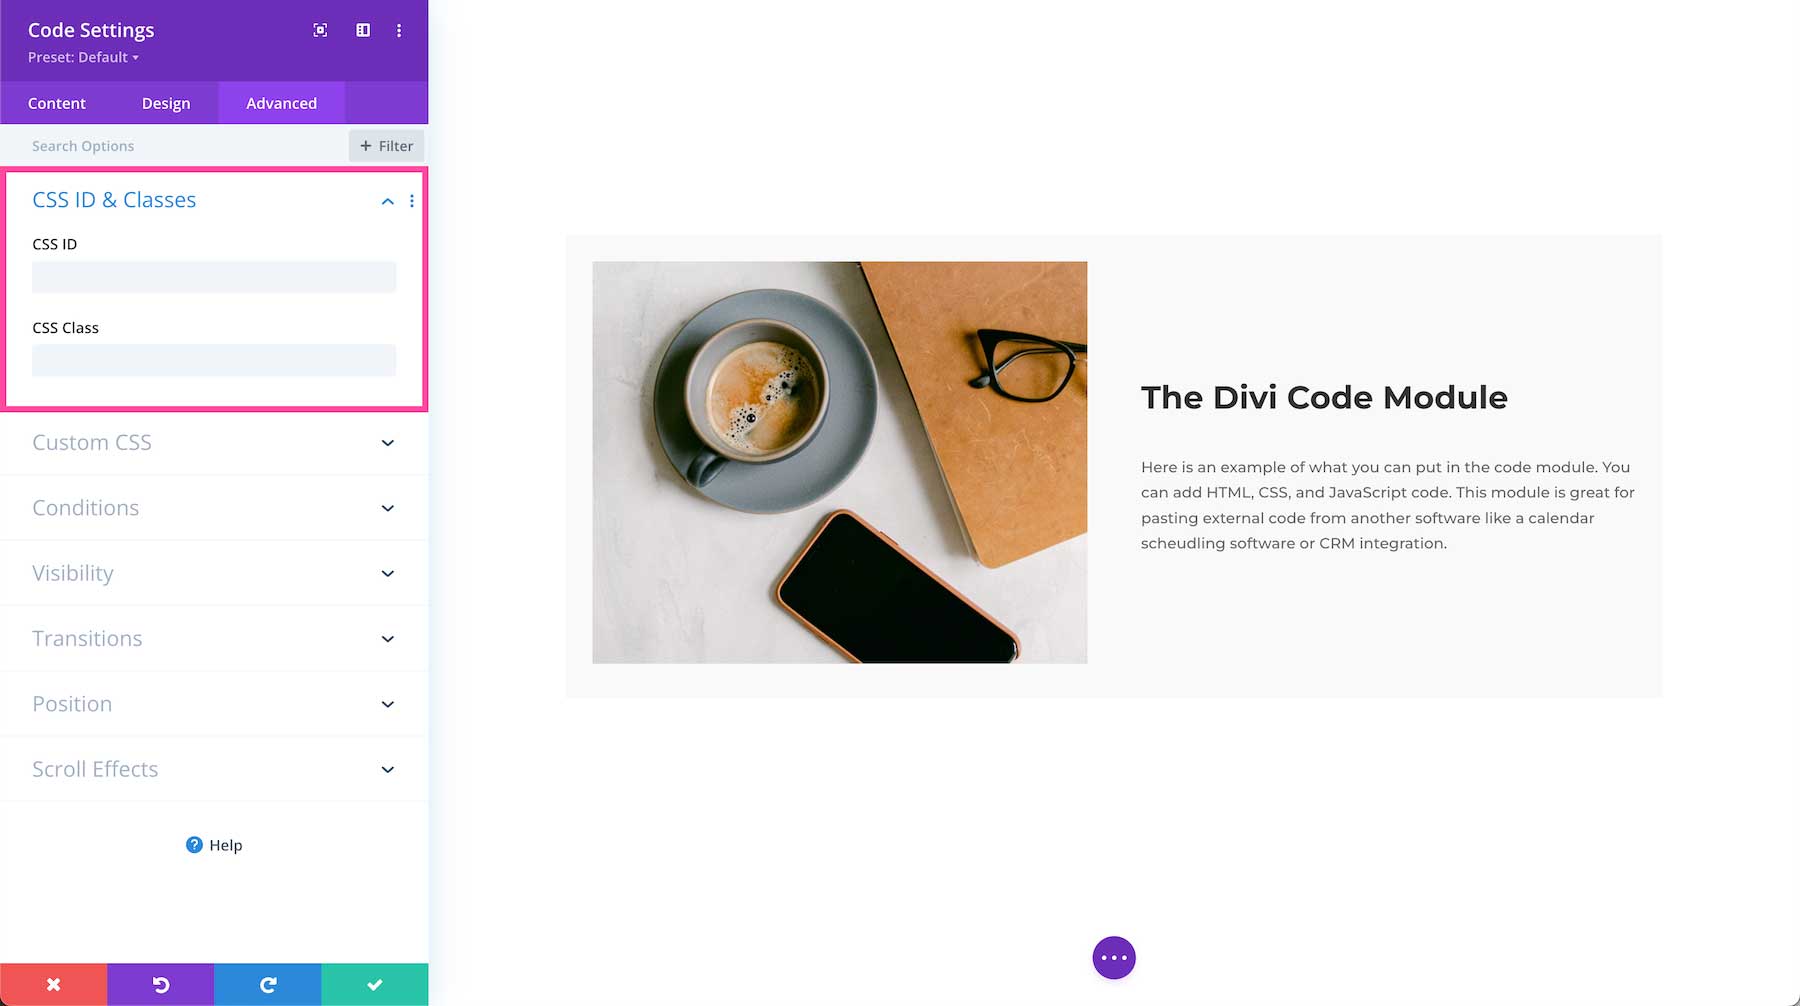 Divi Code Module CSS IDs and classes